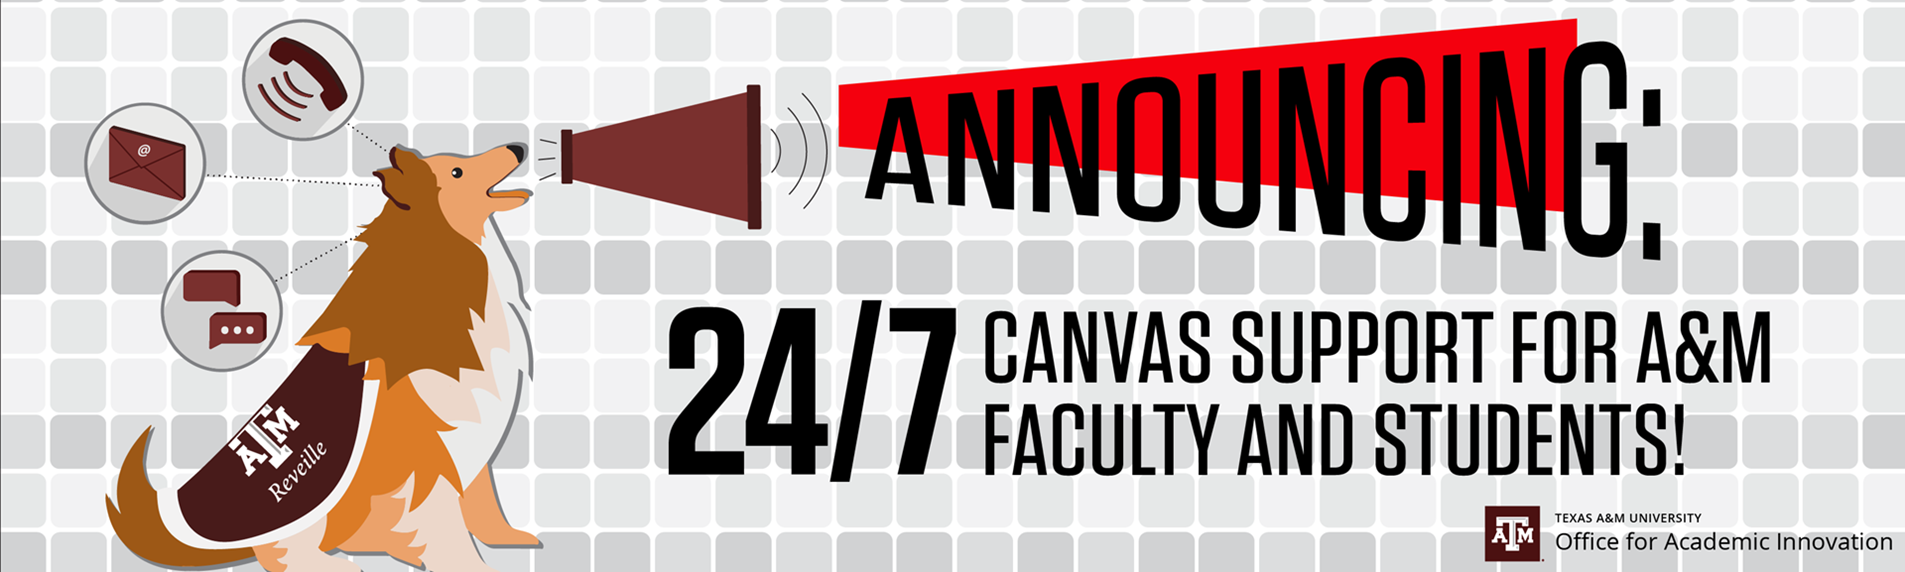 Now Live at TAMU! Get Help Directly in Canvas